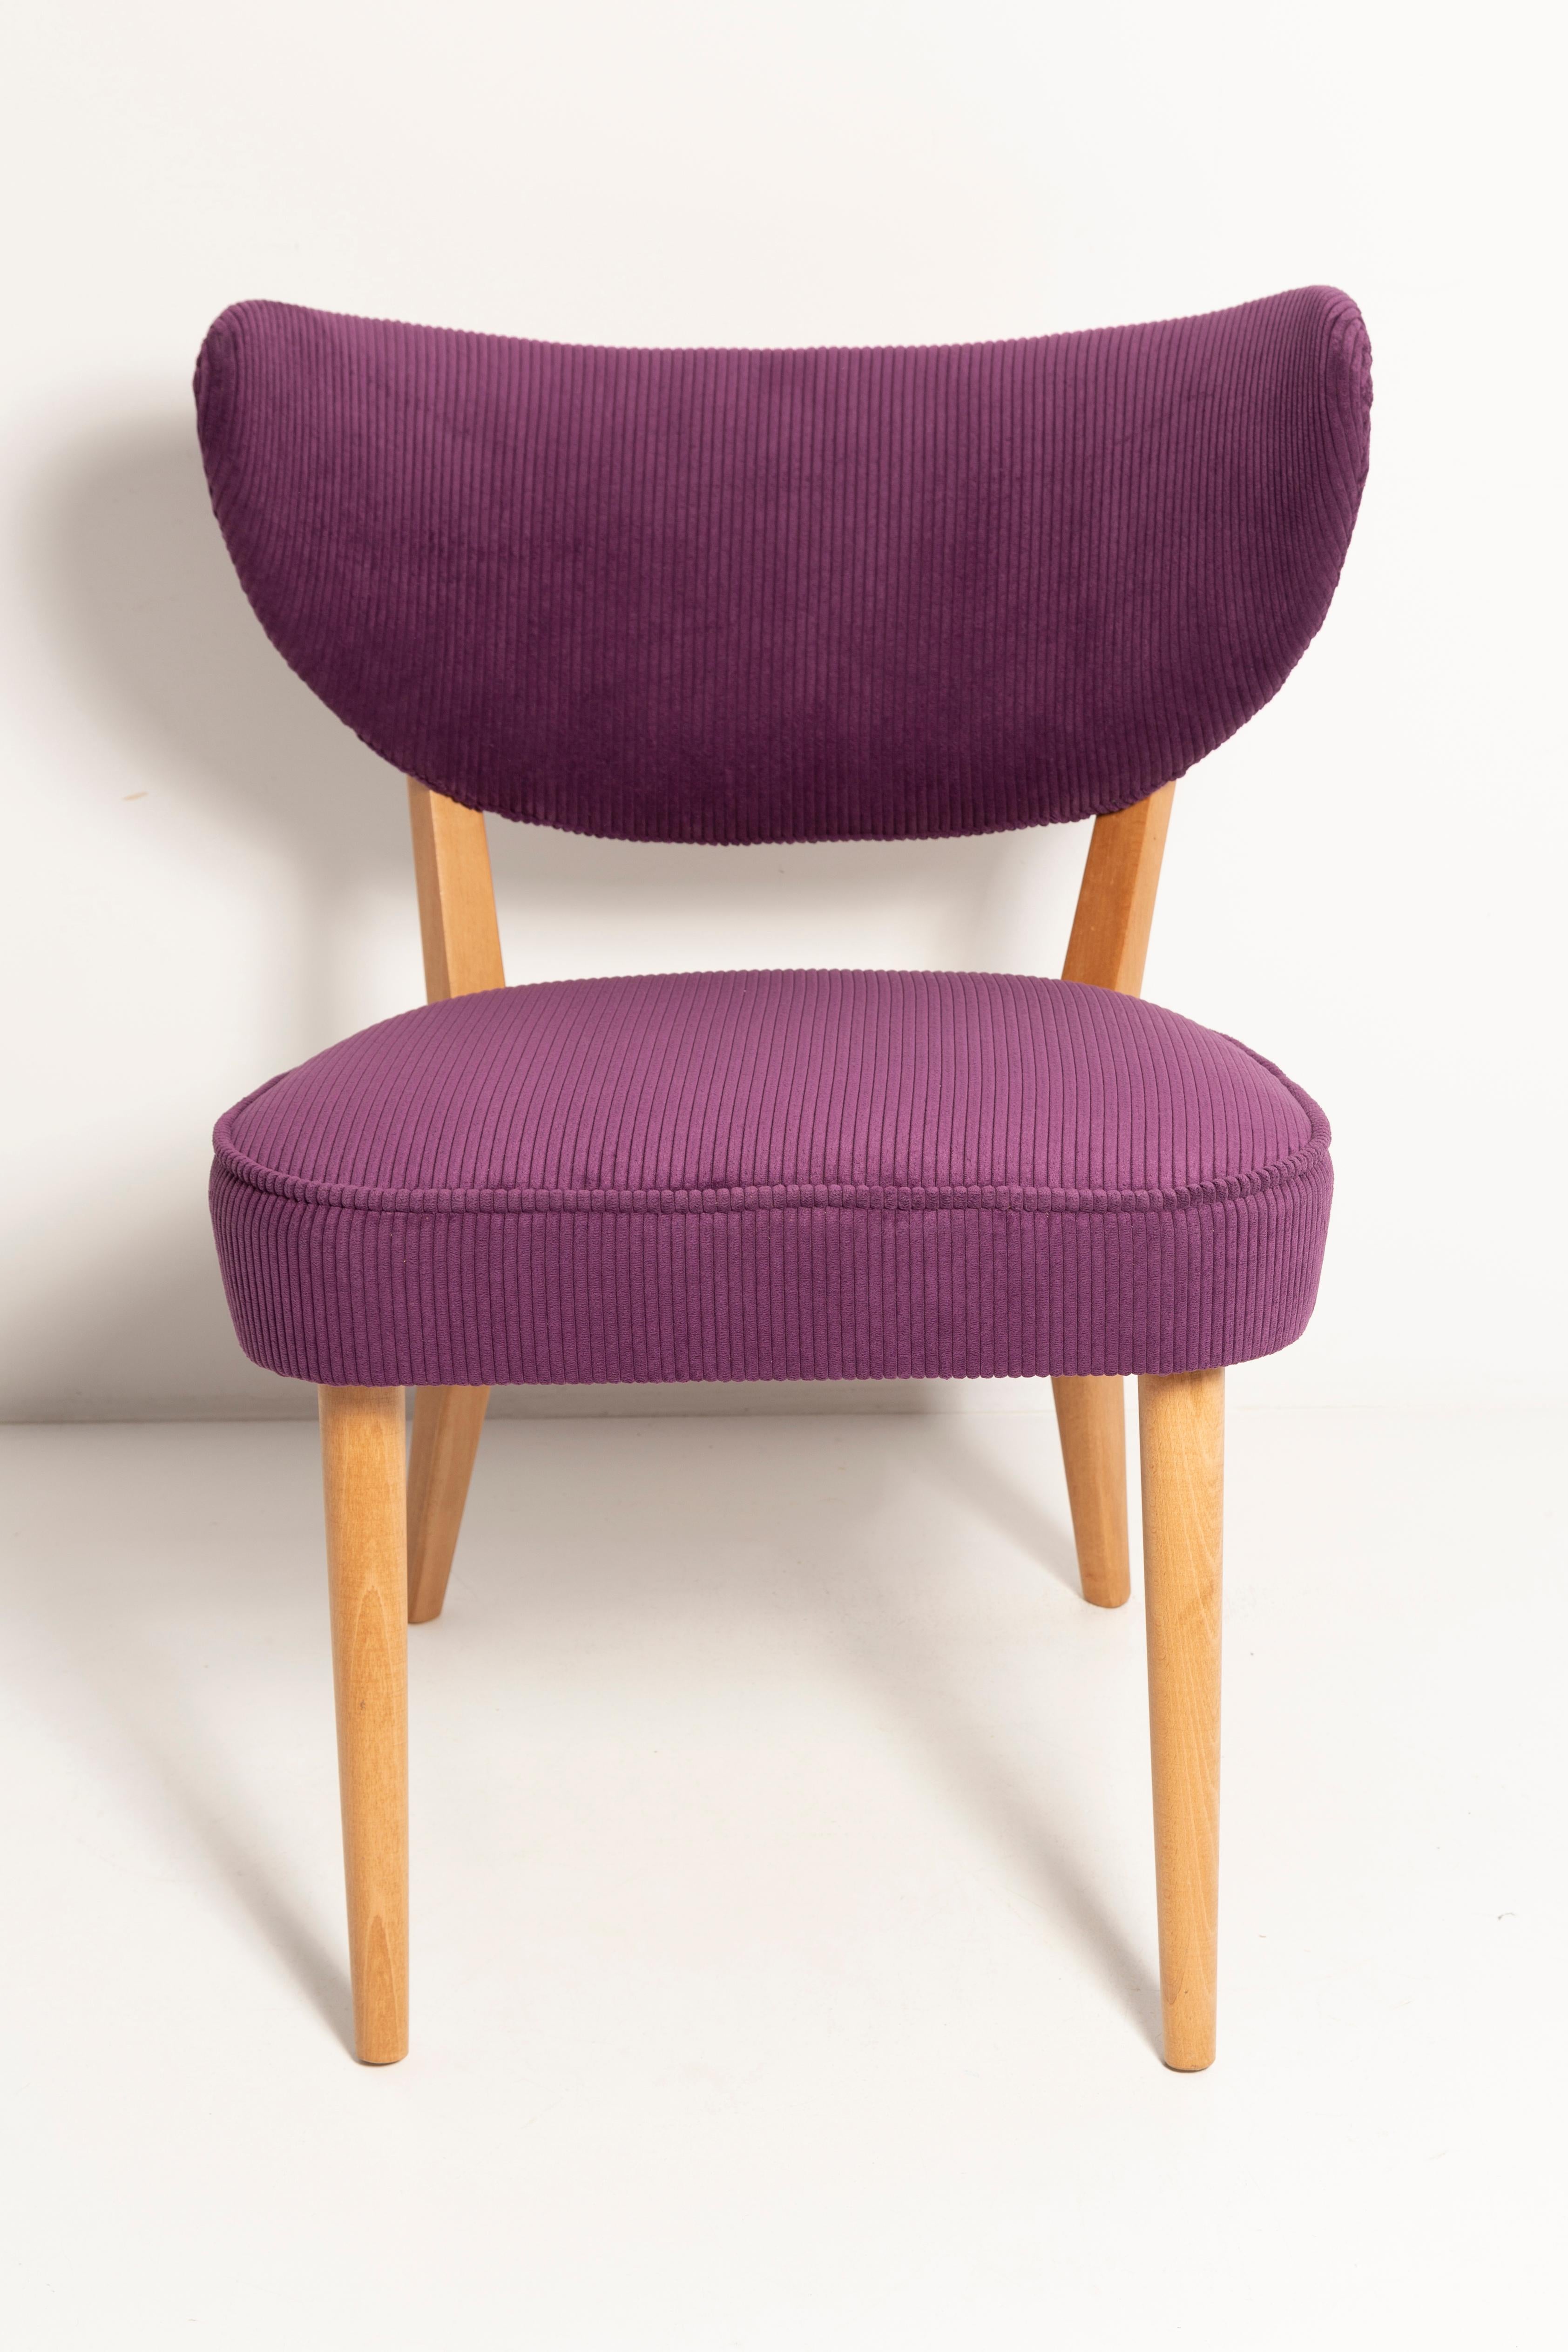 Pair of Midcentury Style Violet Velvet Club Chairs, by Vintola Studio, Europe For Sale 4